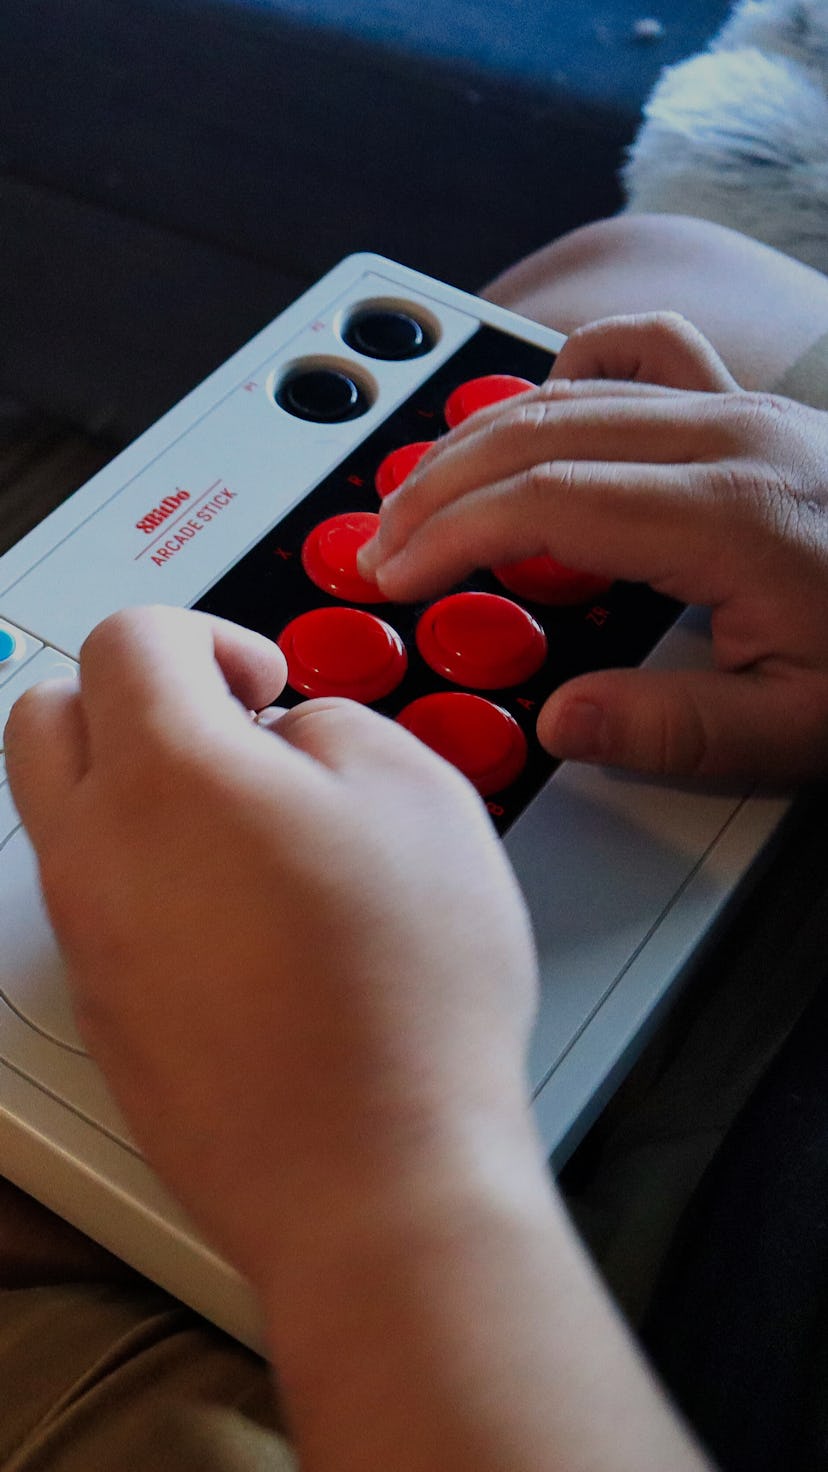 8BitDo Arcade Stick review for PS4 with Wingman XE converter for playing fighting games